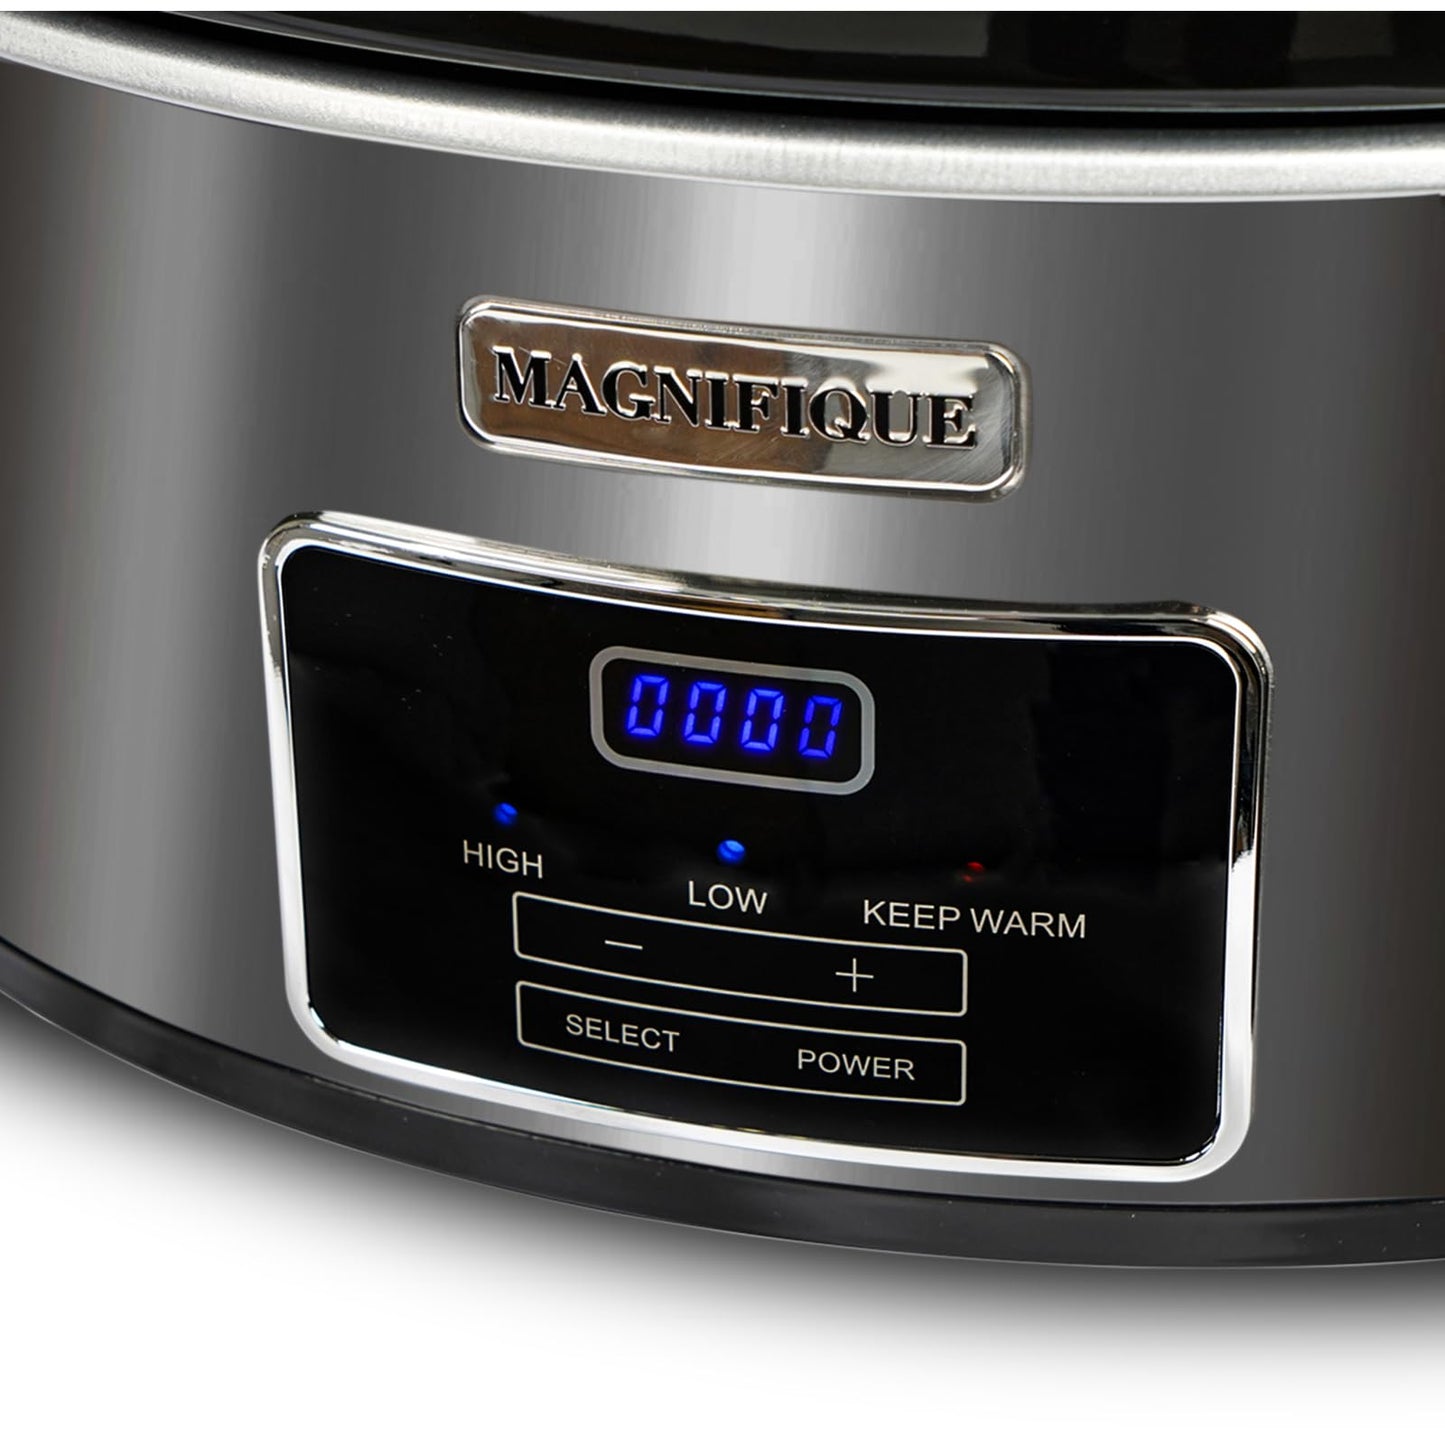 MAGNIFIQUE 7-Quart Casserole Slow Cooker with Timer and Digital Programmable - Small Kitchen Appliance for Family Dinners - Serves 6+ People - Heat Settings: Keep Warm, Low and High